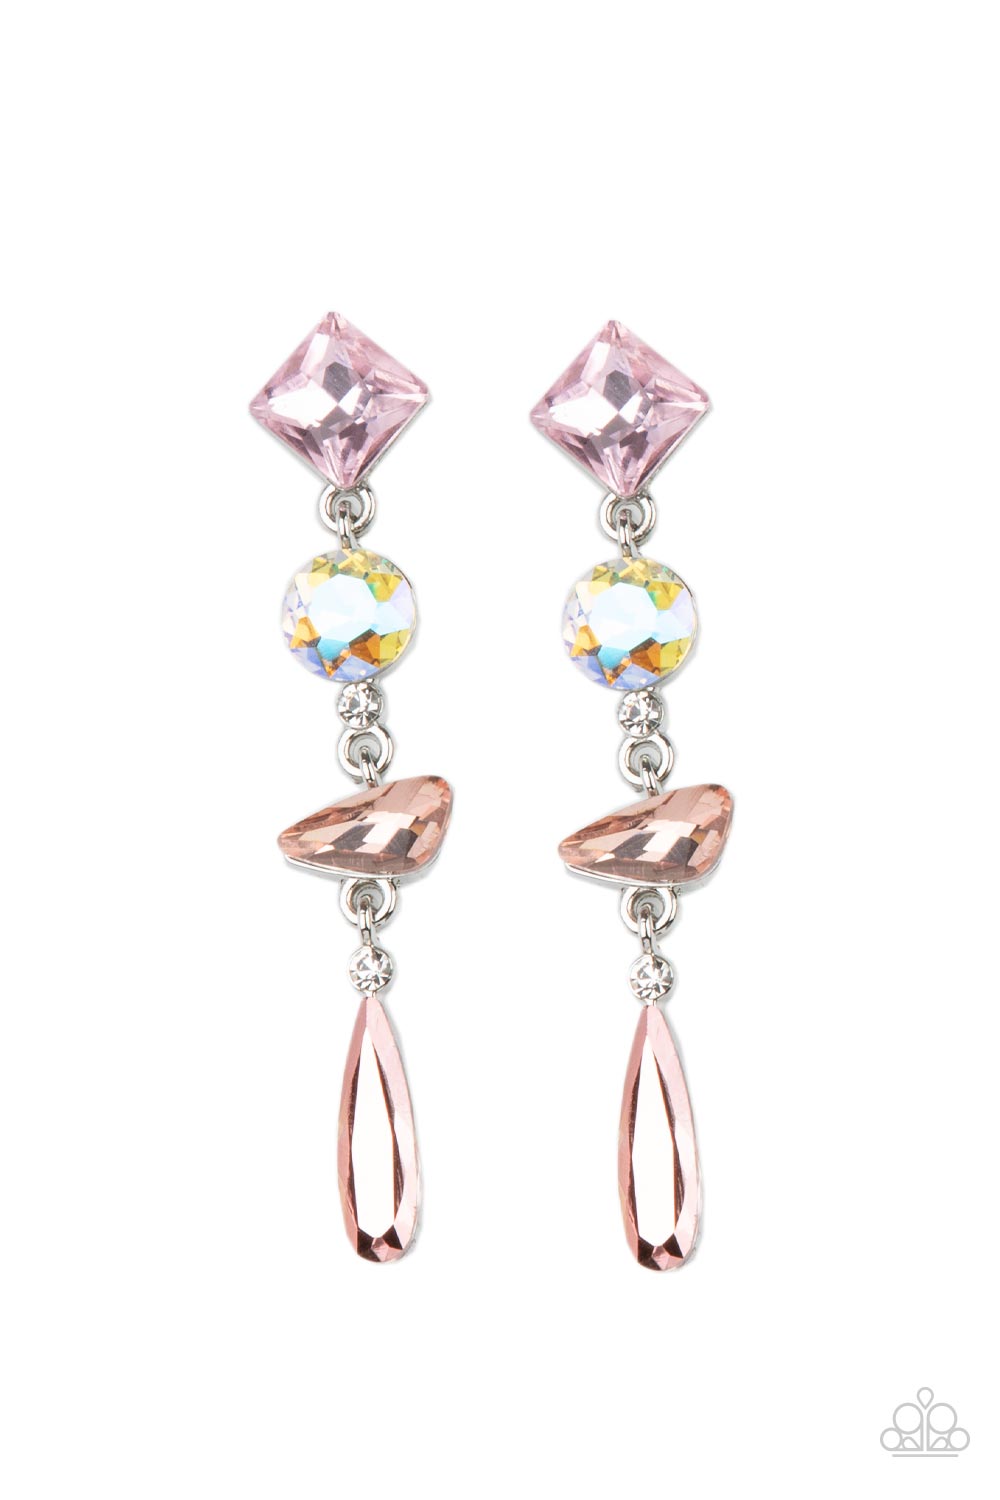 Rock Candy Elegance - Pink - VJ Bedazzled Jewelry